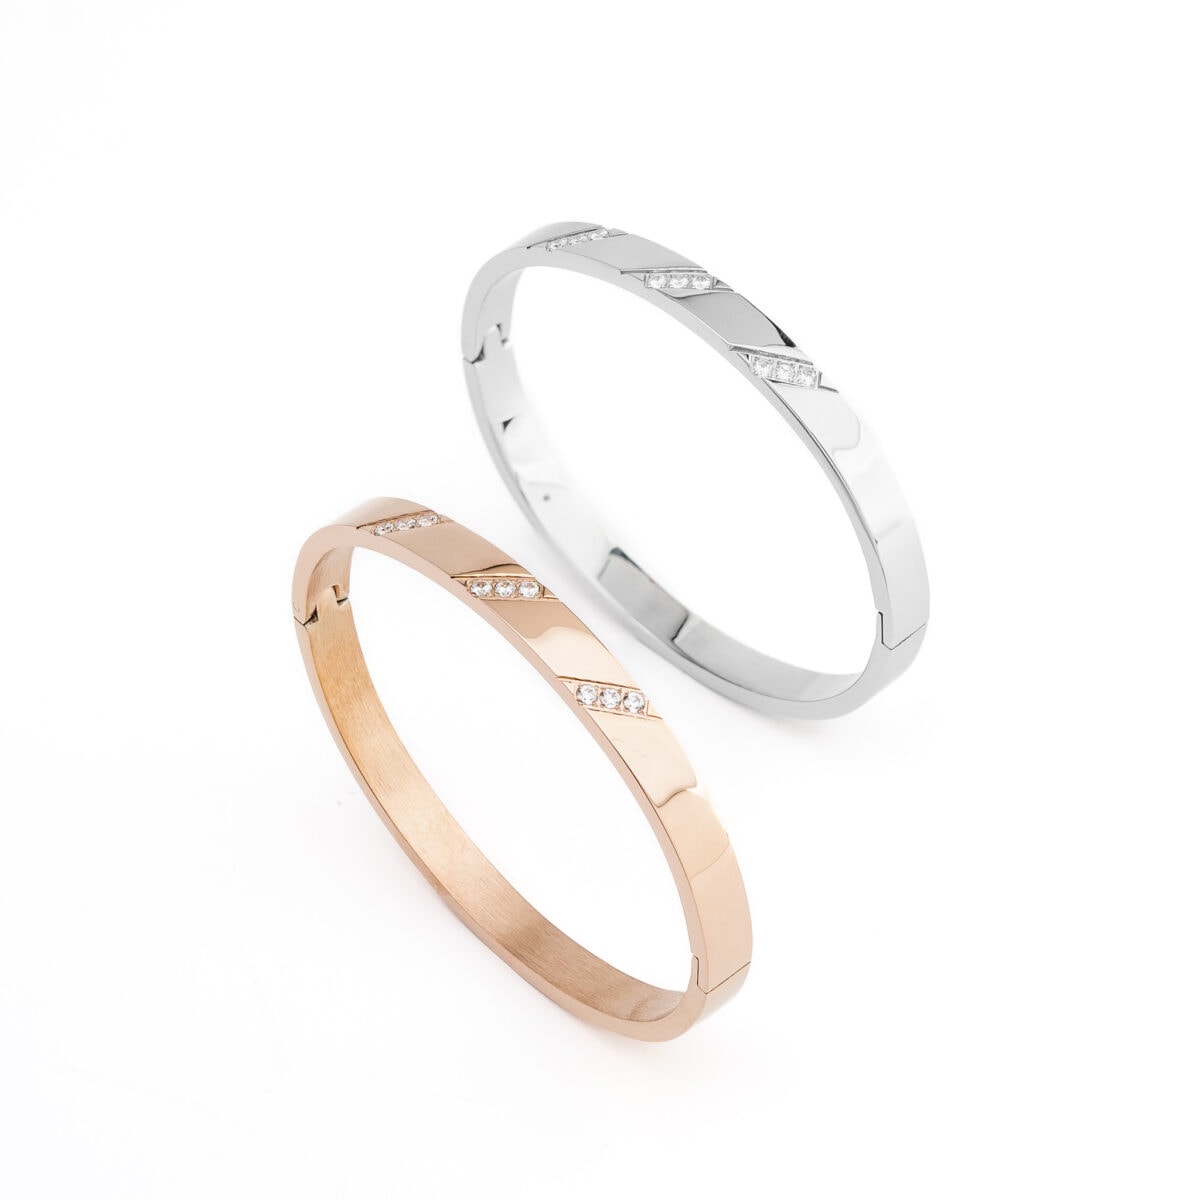 https://m.clubbella.co/product/siena-silver-bangle/ Siena Bnagle (1)